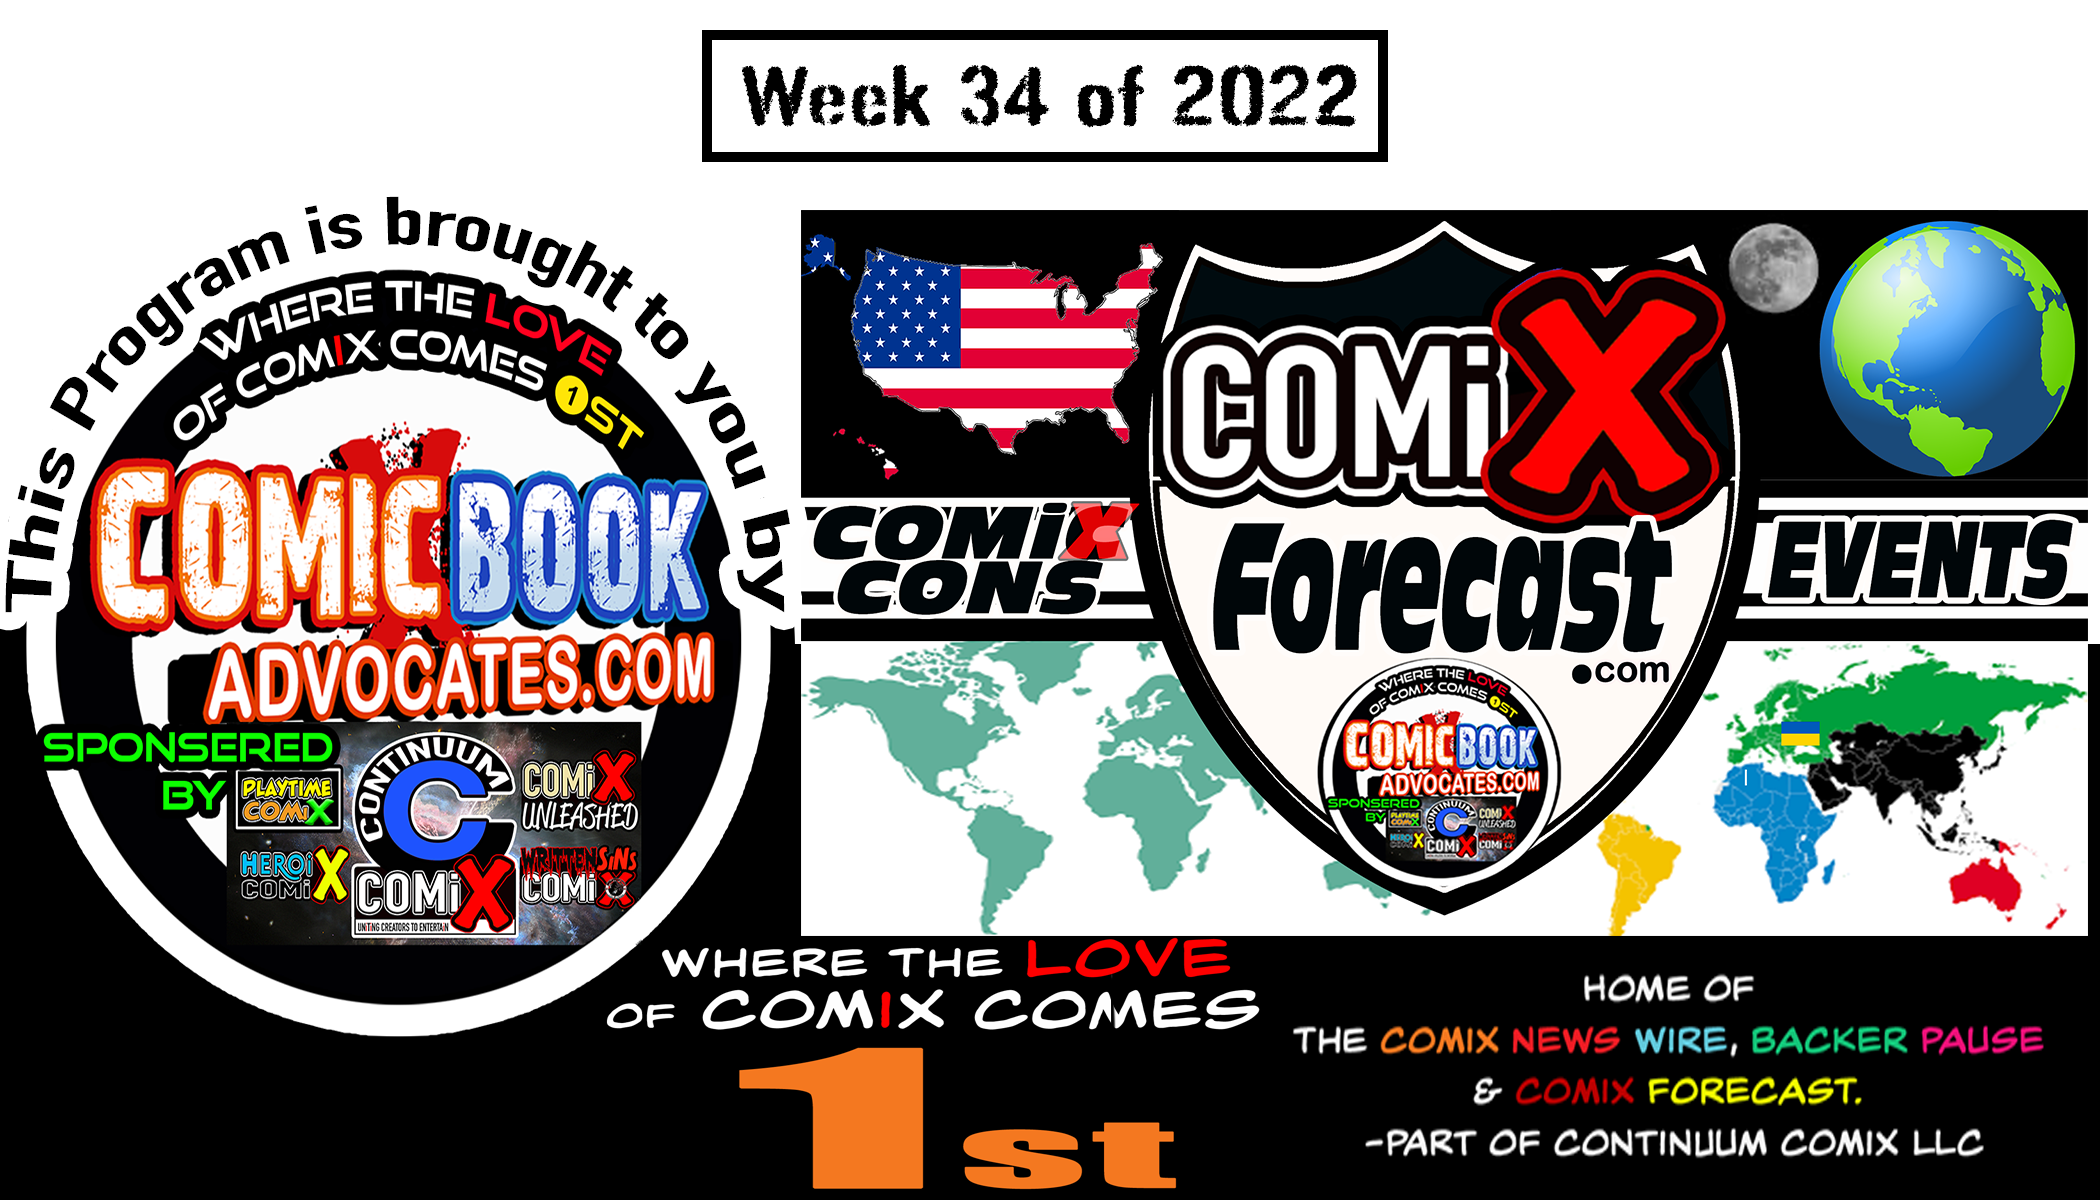 BECOME a COMIC BOOK ADVOCATE by Going to COMIC CONS-COMiXforecast -Wk34of22